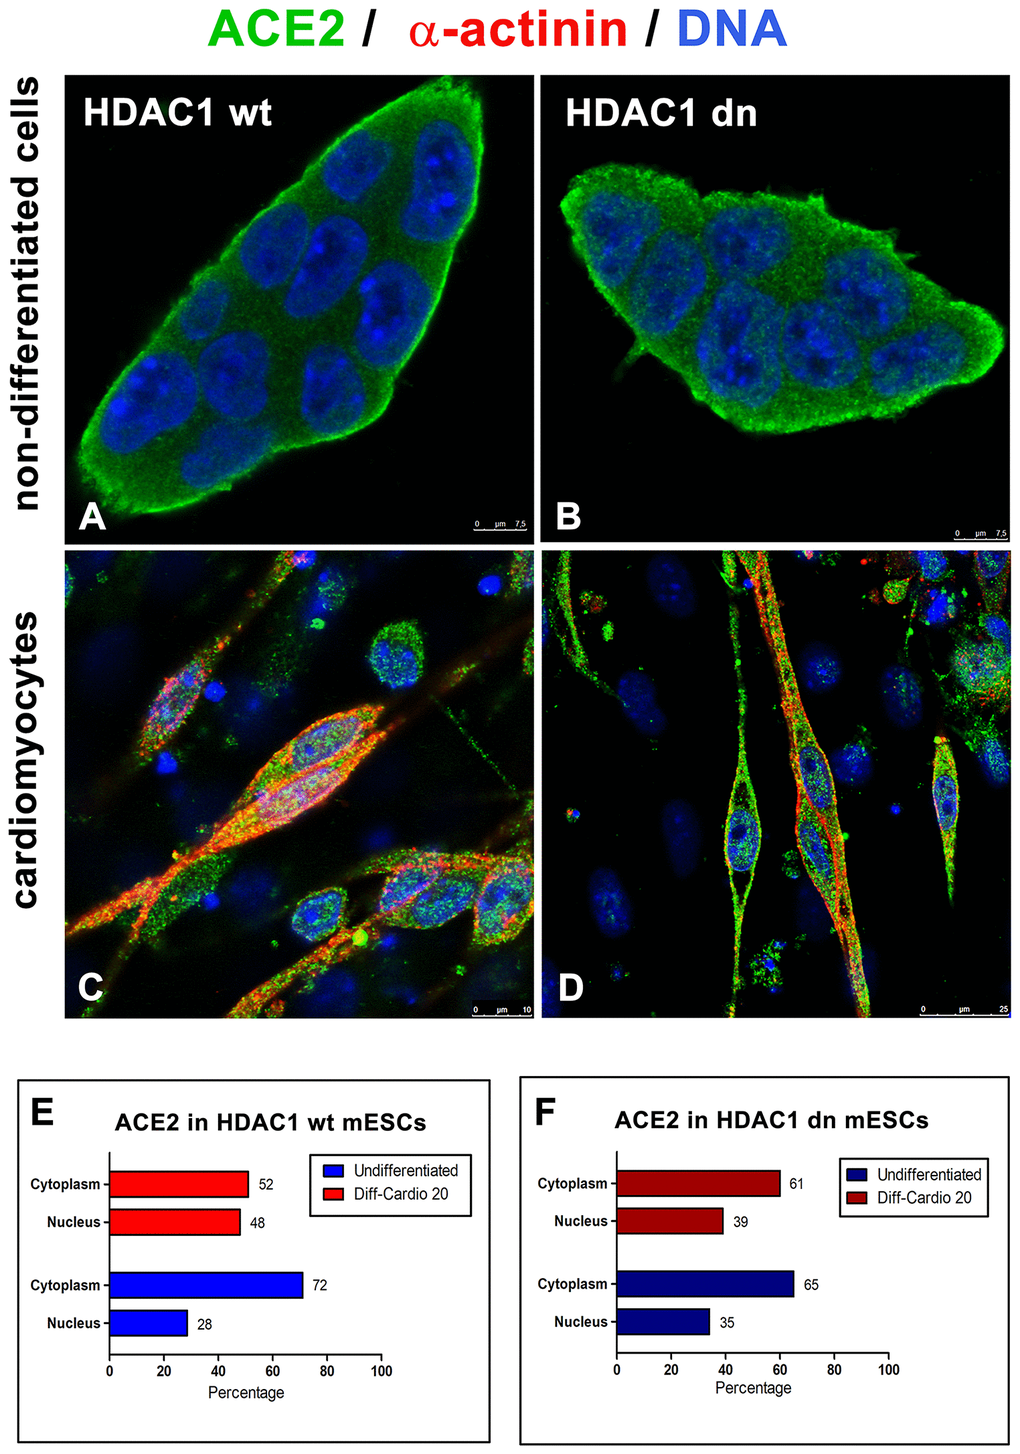 Distribution of ACE2 (green) in wt and HDAC1-depleted mES cells, non-differentiated and differentiated into cardiomyocytes. Immunofluorescence analyses were performed in (A) HDAC1 wt mESCs, (B) HDAC1 dn mESCs, (C) α-actinin (red)-positive cardiomyocytes generated from HDAC1 wt mESCs, and (D) α-actinin (red)-positive cardiomyocytes generated from HDAC1 dn mESCs. DAPI (blue) was used as a counterstain. (E) The nucleo/cytoplasmic ratio of the level of ACE2 is shown for HDAC1 wt mESCs. (F) The nucleo/cytoplasmic ratio of the level of ACE2 is shown for HDAC1 dn mESCs.